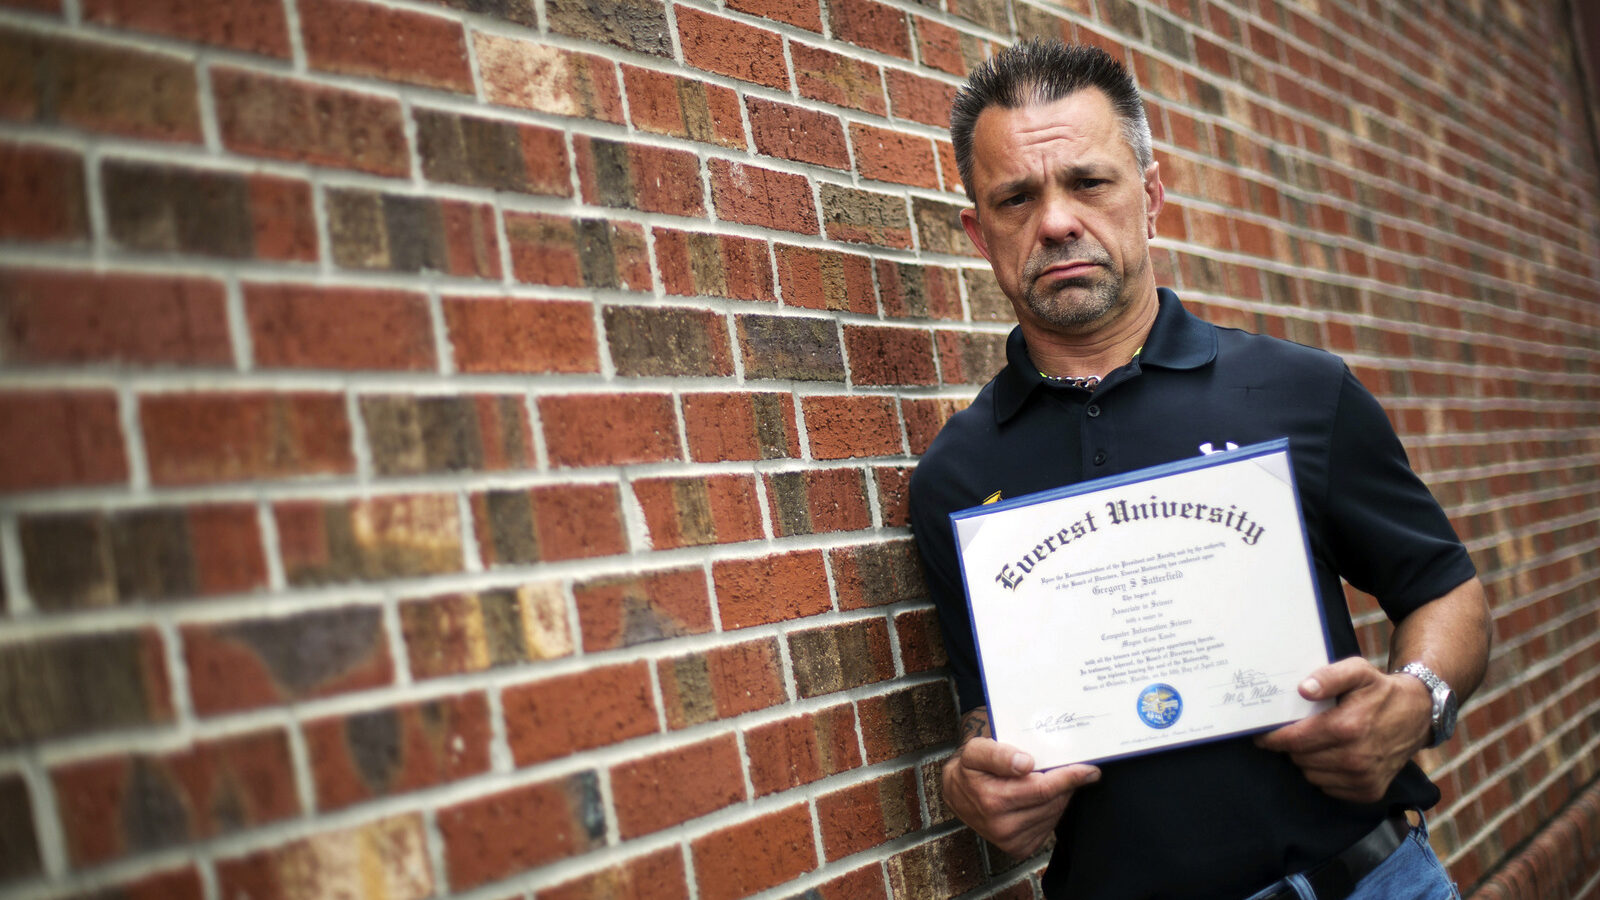 In this March 11, 2016 photo, Shane Satterfield, a roofer who owes more than $30,000 in debt for an associate’s degree in computer science from one of the country’s largest for-profit college companies that failed in 2014, holds his diploma in Atlanta. "I graduated in April at the top of my class, with honors," says Satterfield. "And I can’t get a job paying over $8.50 an hour." Despite pledging to distance itself from the poor business practices of the for-profit Corinthian Colleges Inc, the new owner of the Everest career college chain has retained key members of its staff and some of its hard-charging sales tactics. (AP Photo/David Goldman)